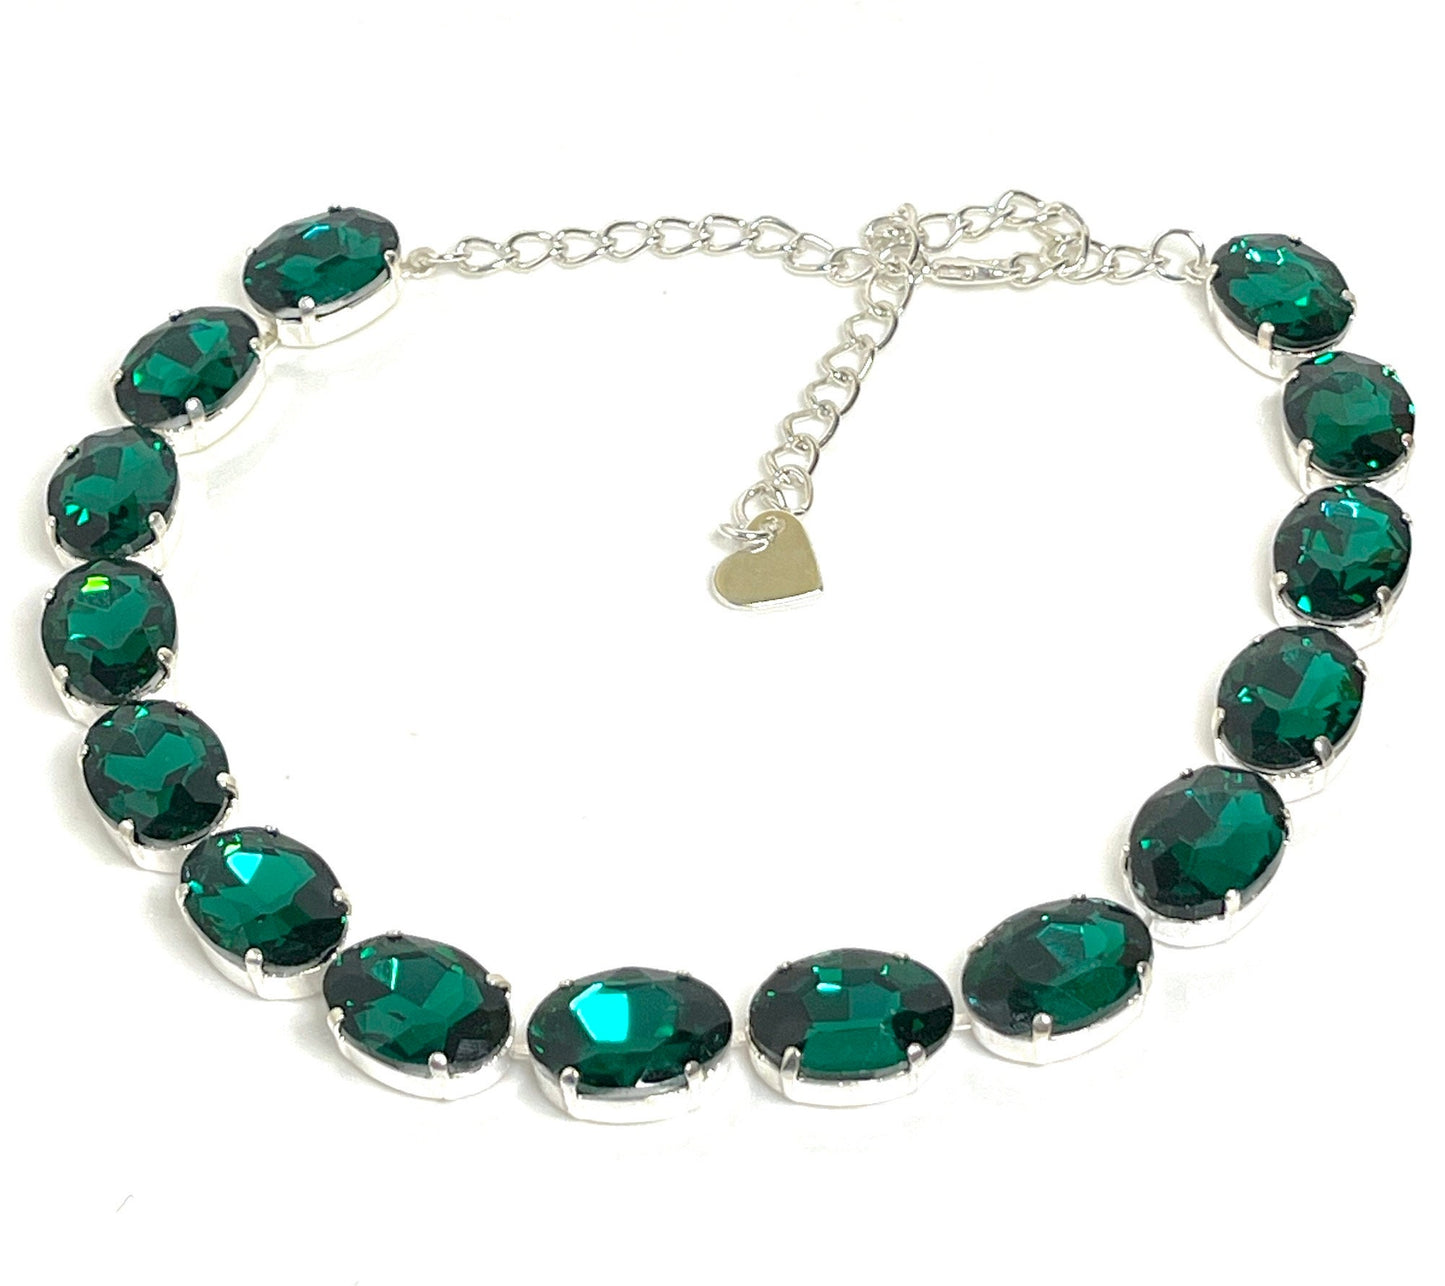 Aquamarine Emerald Crystal Georgian Collet Necklaces, Clear Crystal Choker, Anna Wintour Style, Riviere Necklaces, Statement Necklaces